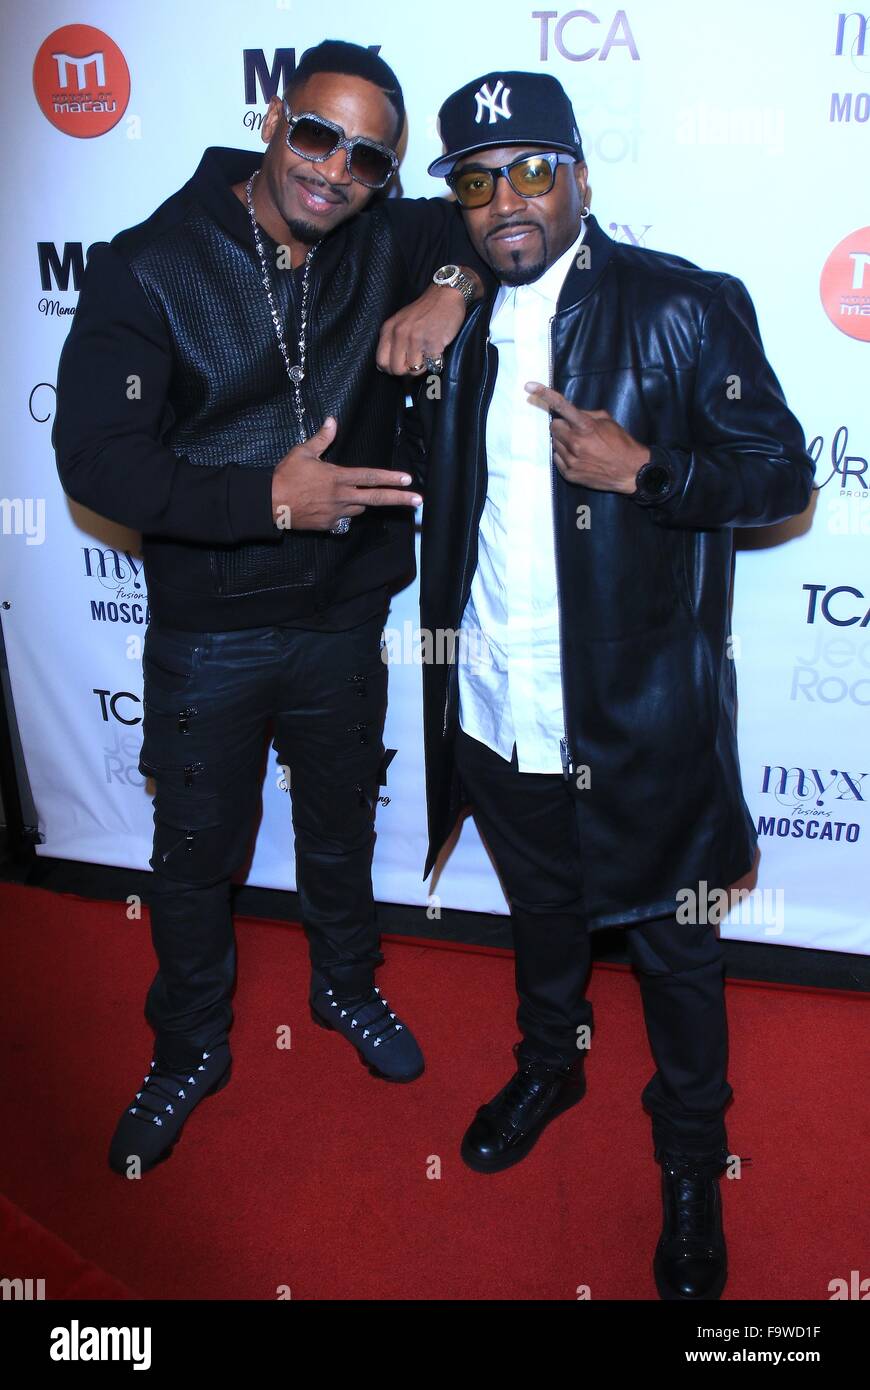 Mona Scott Young Hosts Big in 2015 Private Celebration at House of Macau in Hollywood on November 11, 2015  Featuring: Stevie J and Teddy Riley Where: West Hollywood, California, United States When: 11 Nov 2015 Stock Photo